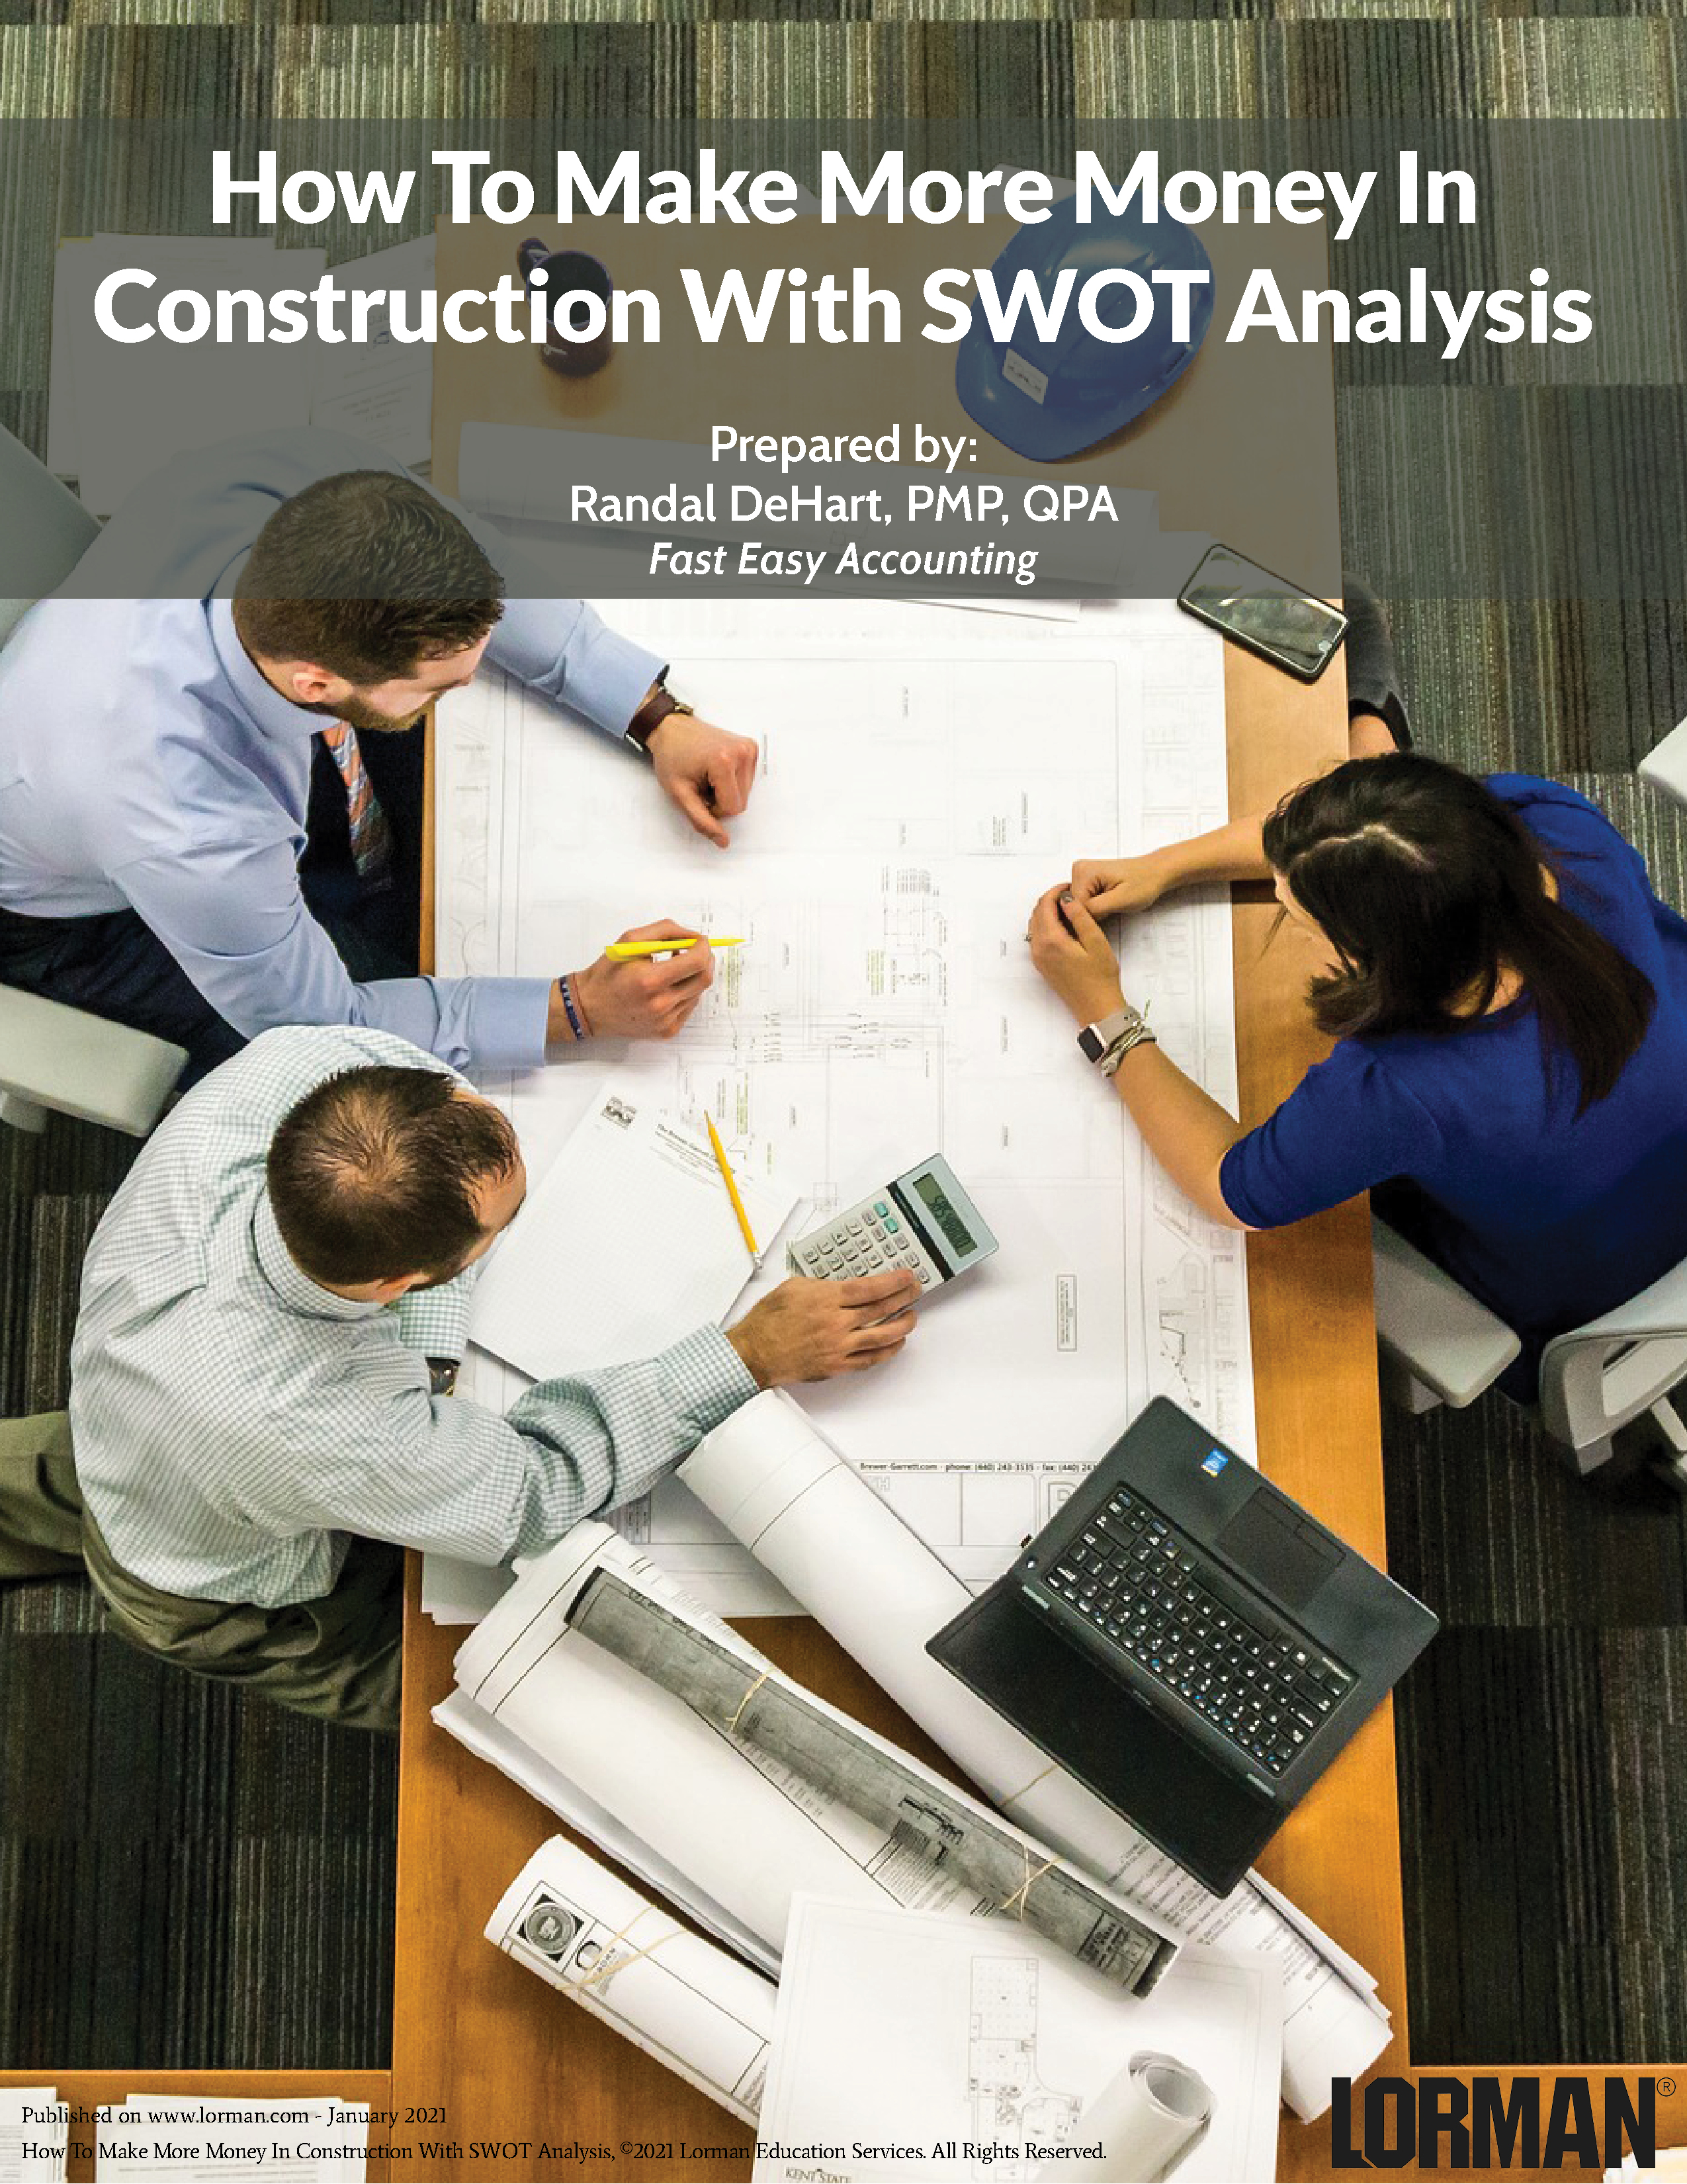 How to Make More Money in Construction With SWOT Analysis